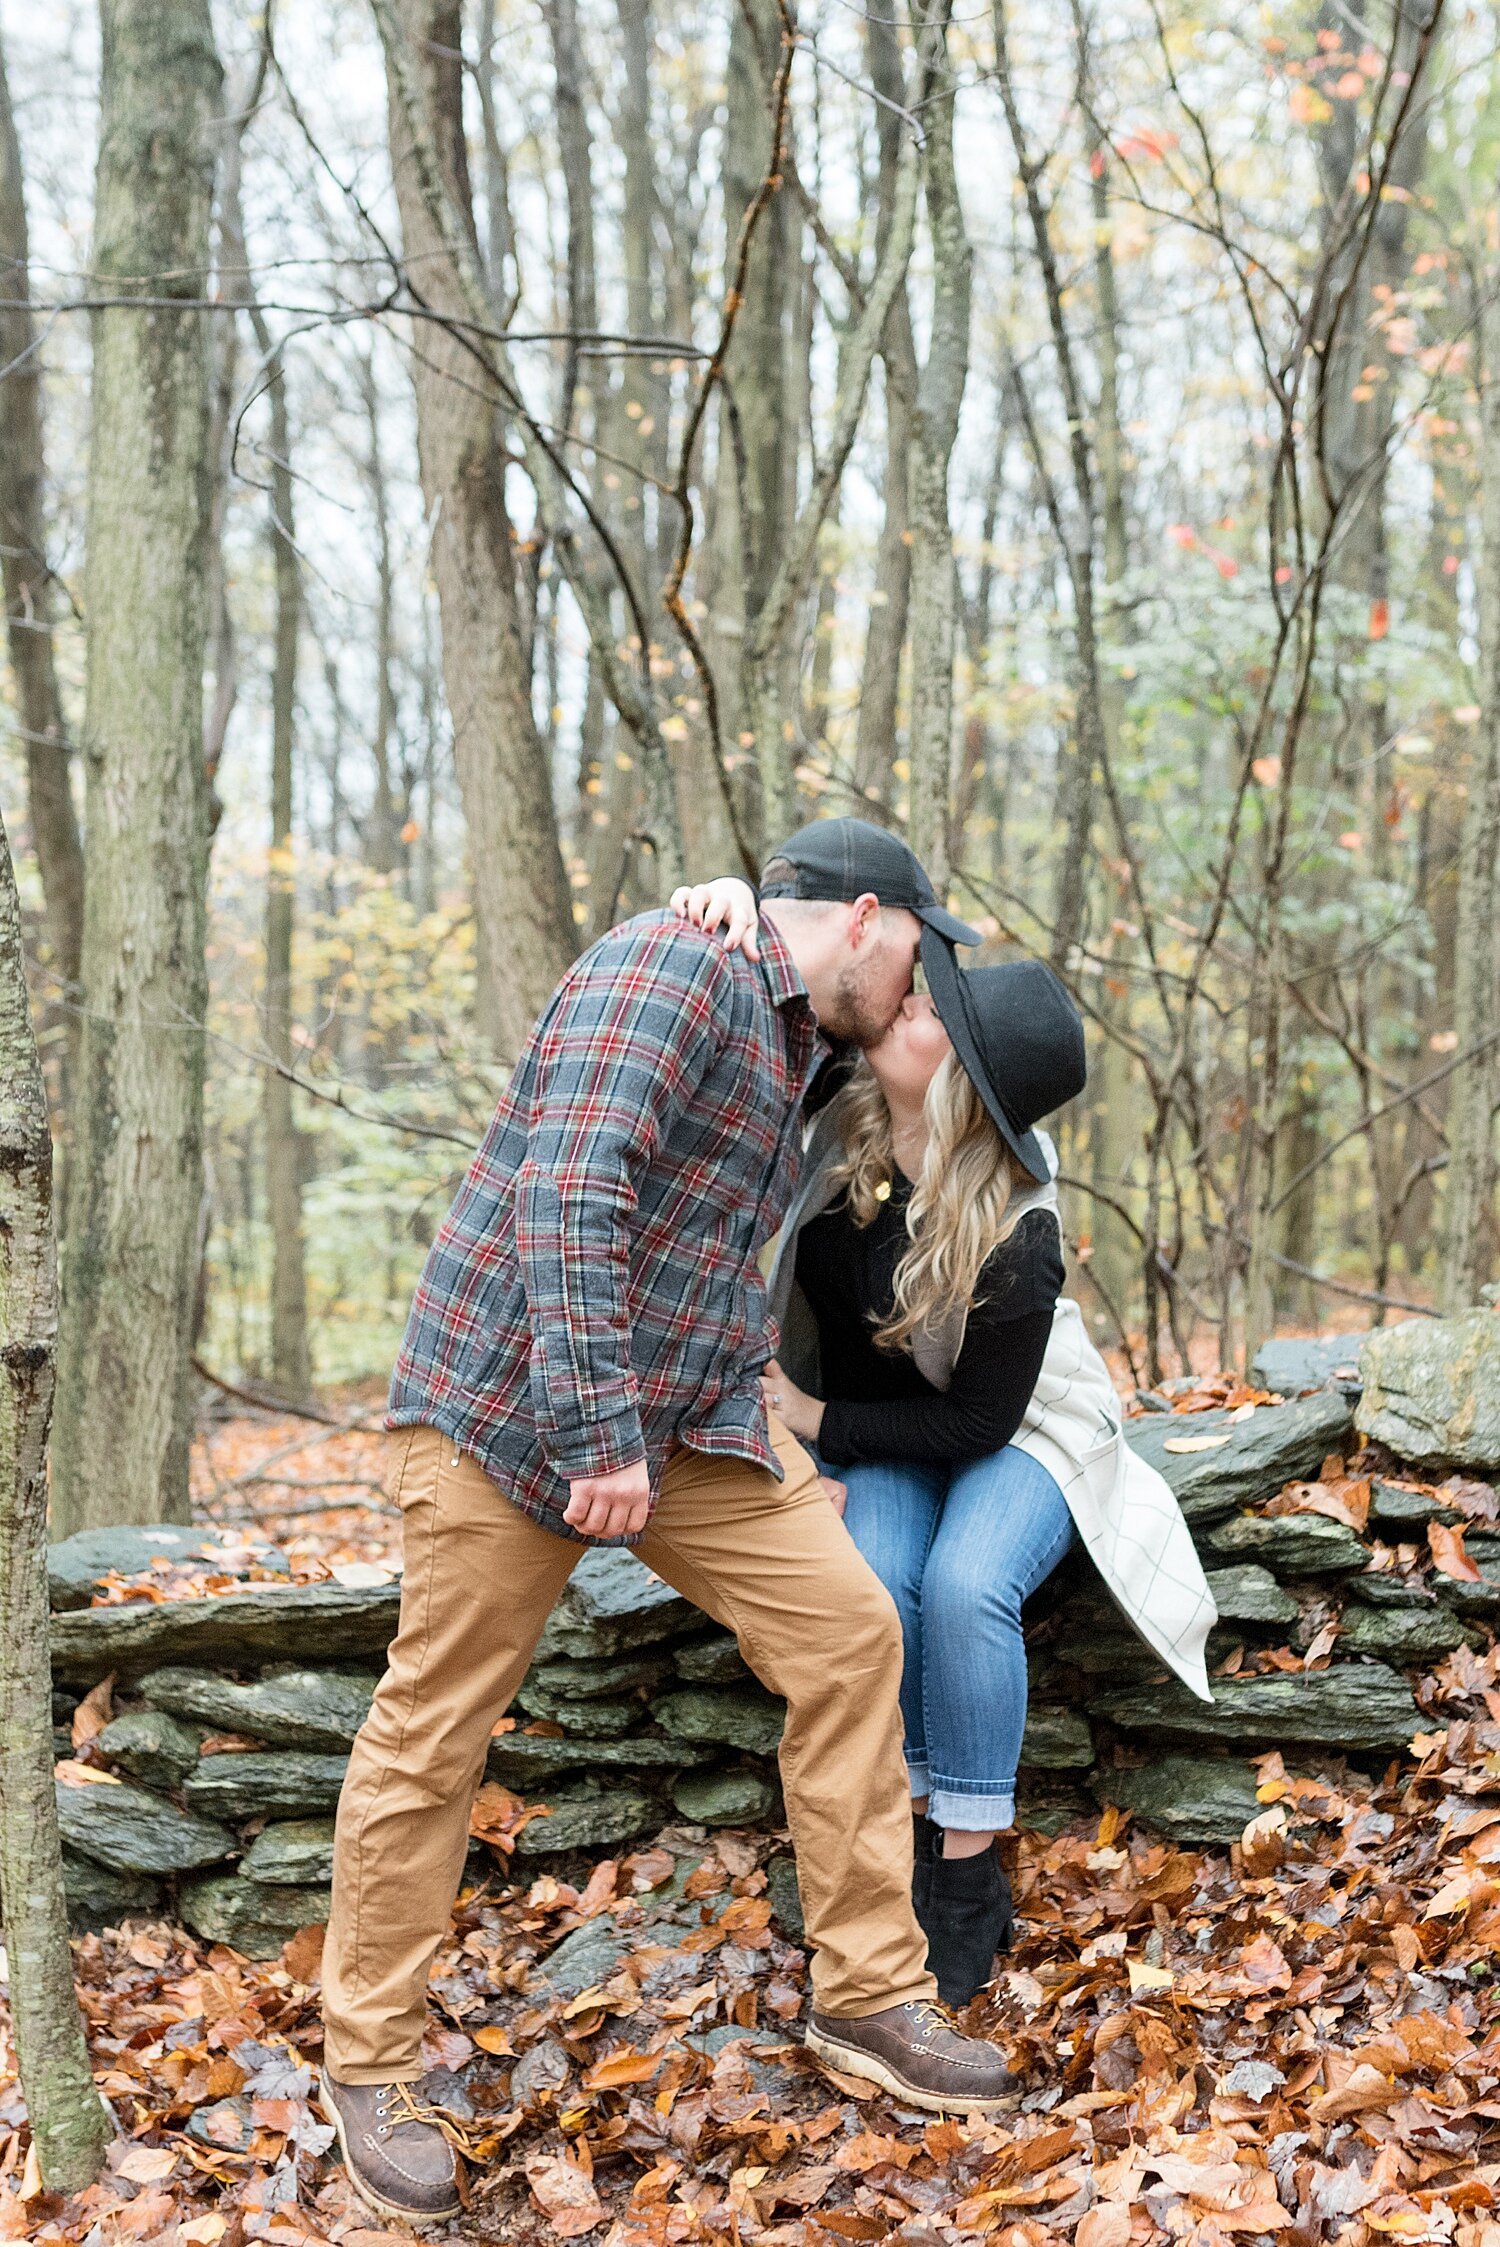 Pinnacle Overlook Holtwood PA Surprise Fall Proposal 